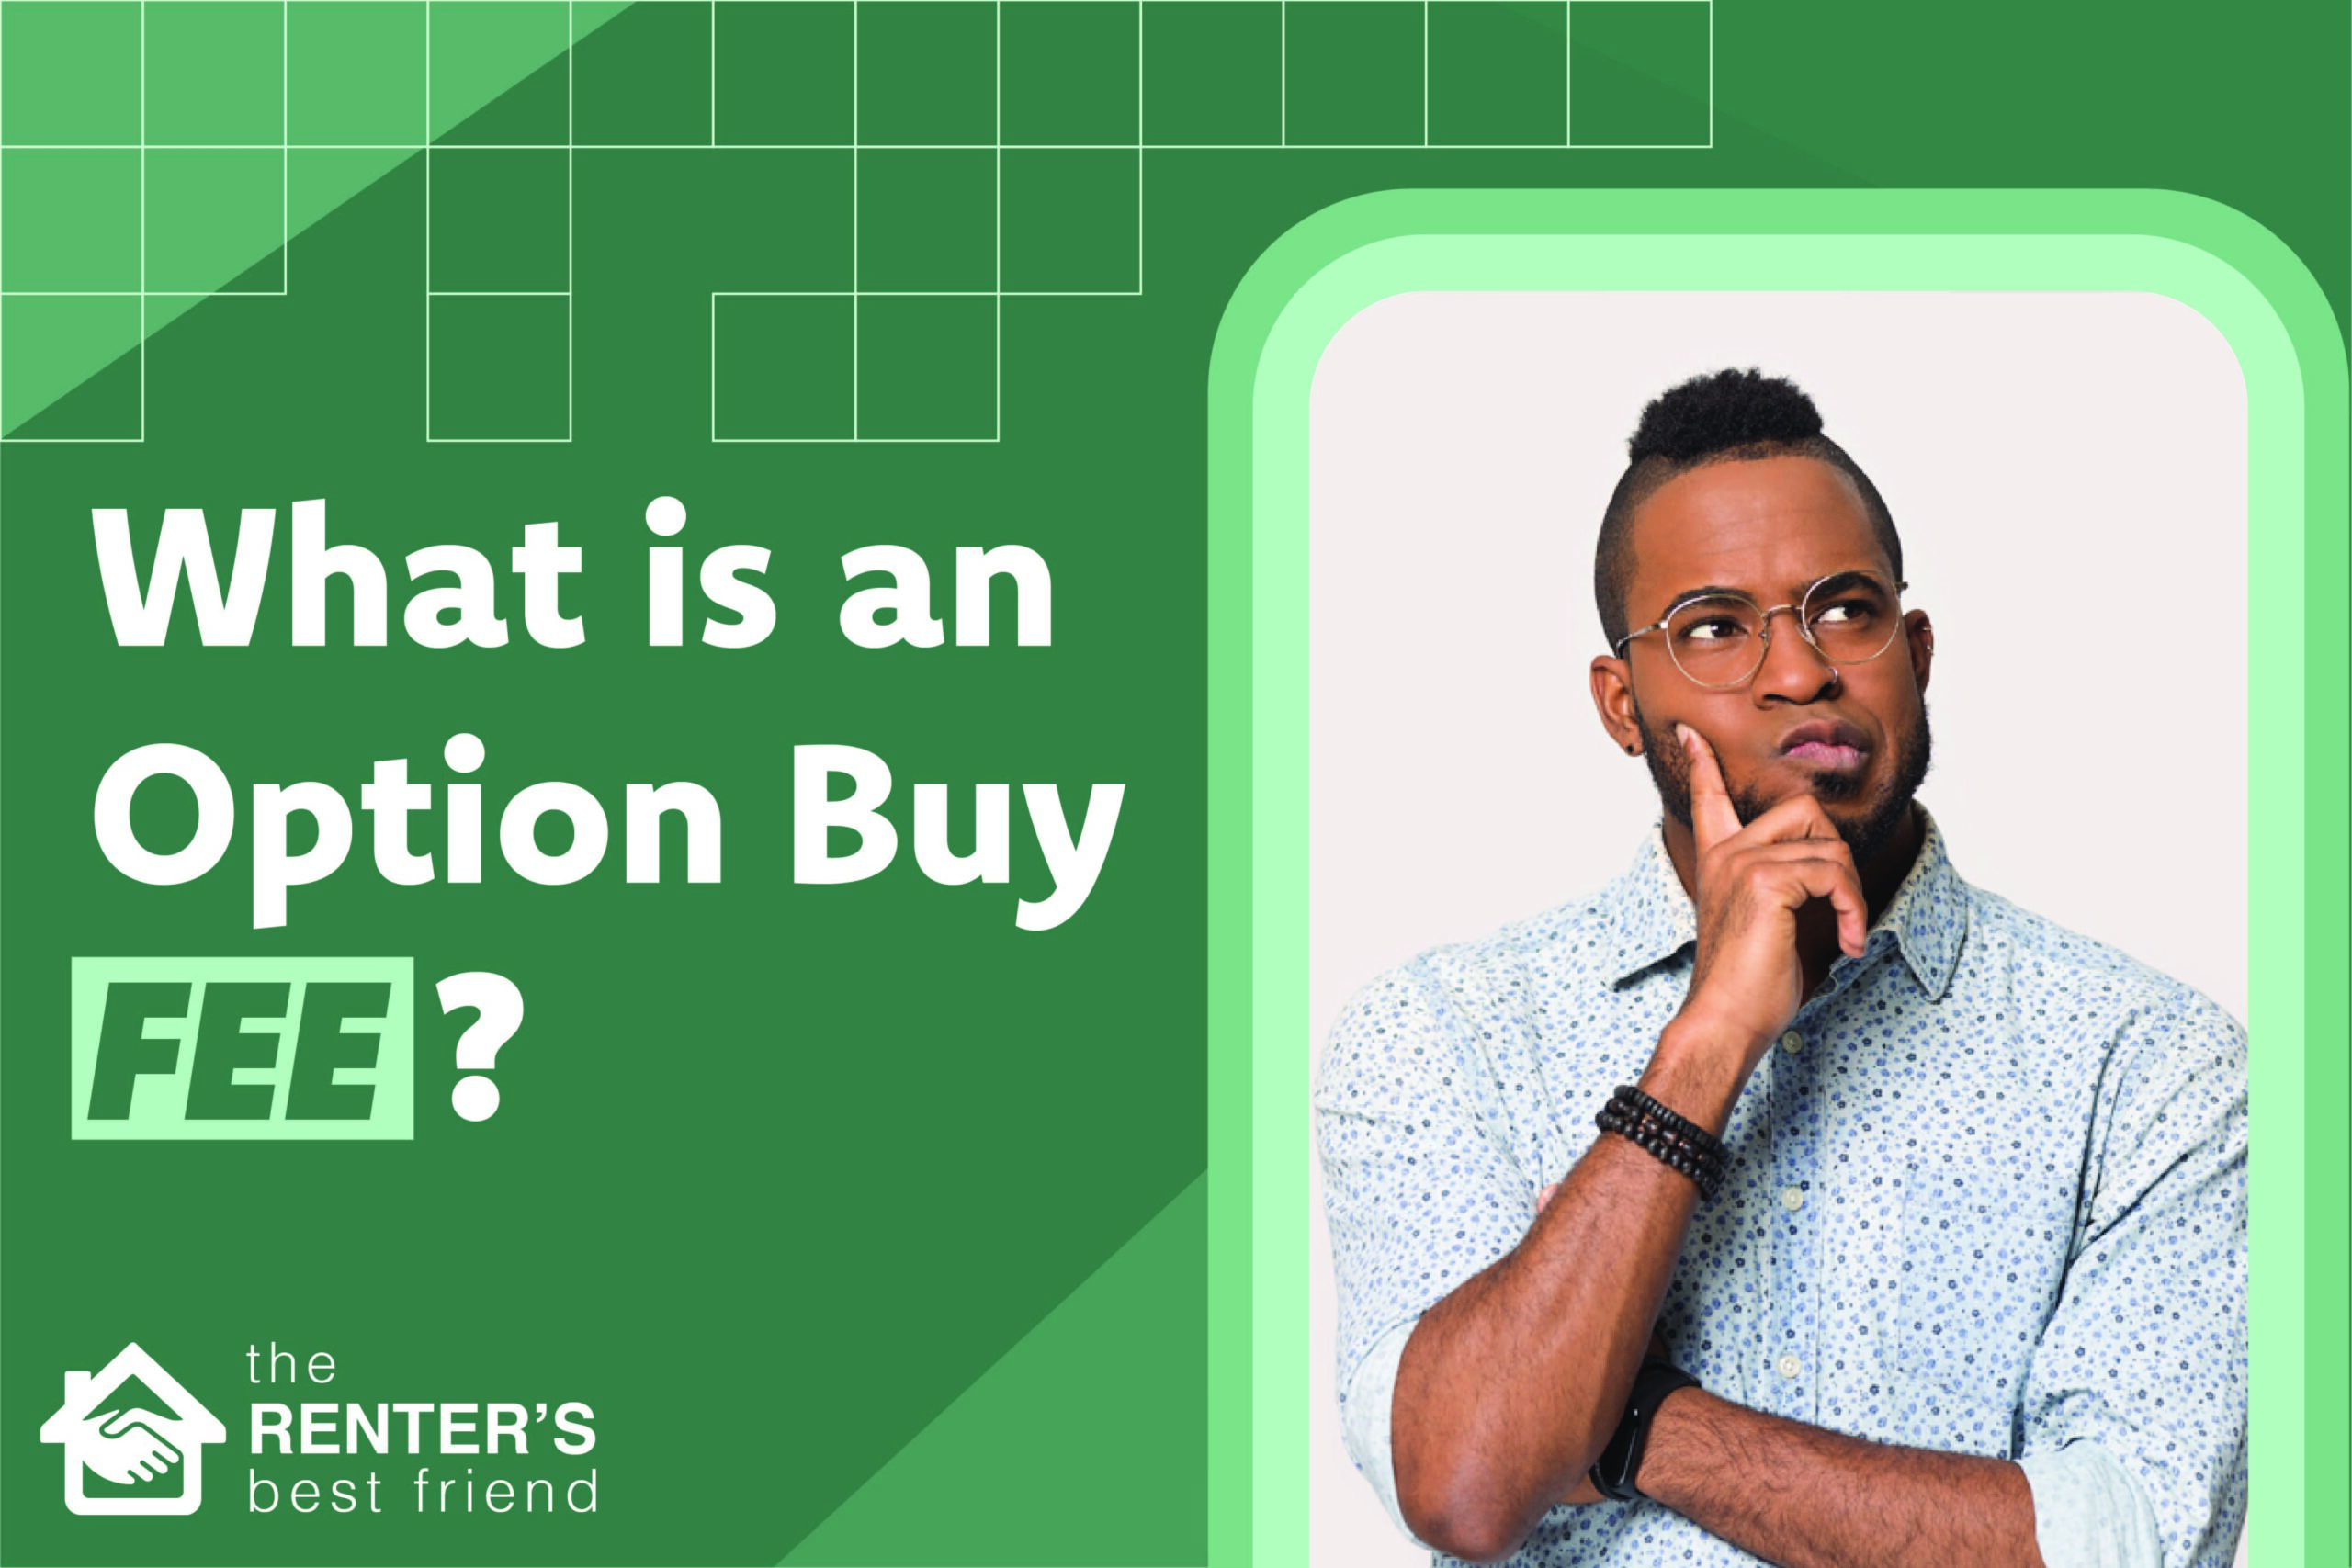 What is an Option Buy Fee?